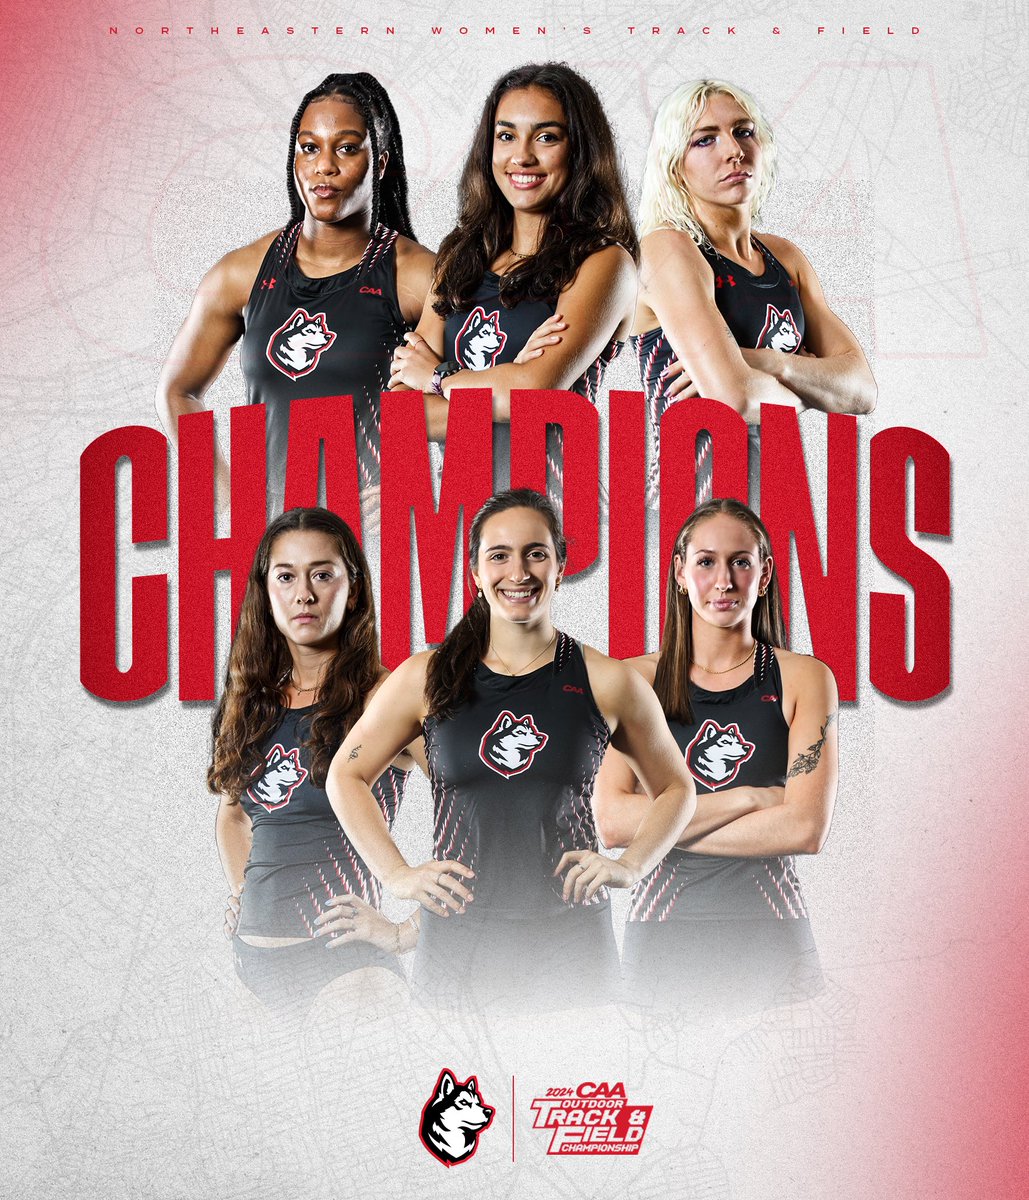 ALWAYS OUR YEAR.

The Northeastern women’s track and field team is the CAA Outdoor champion for the first time since 2019!

#CAAChamps #NCAATF